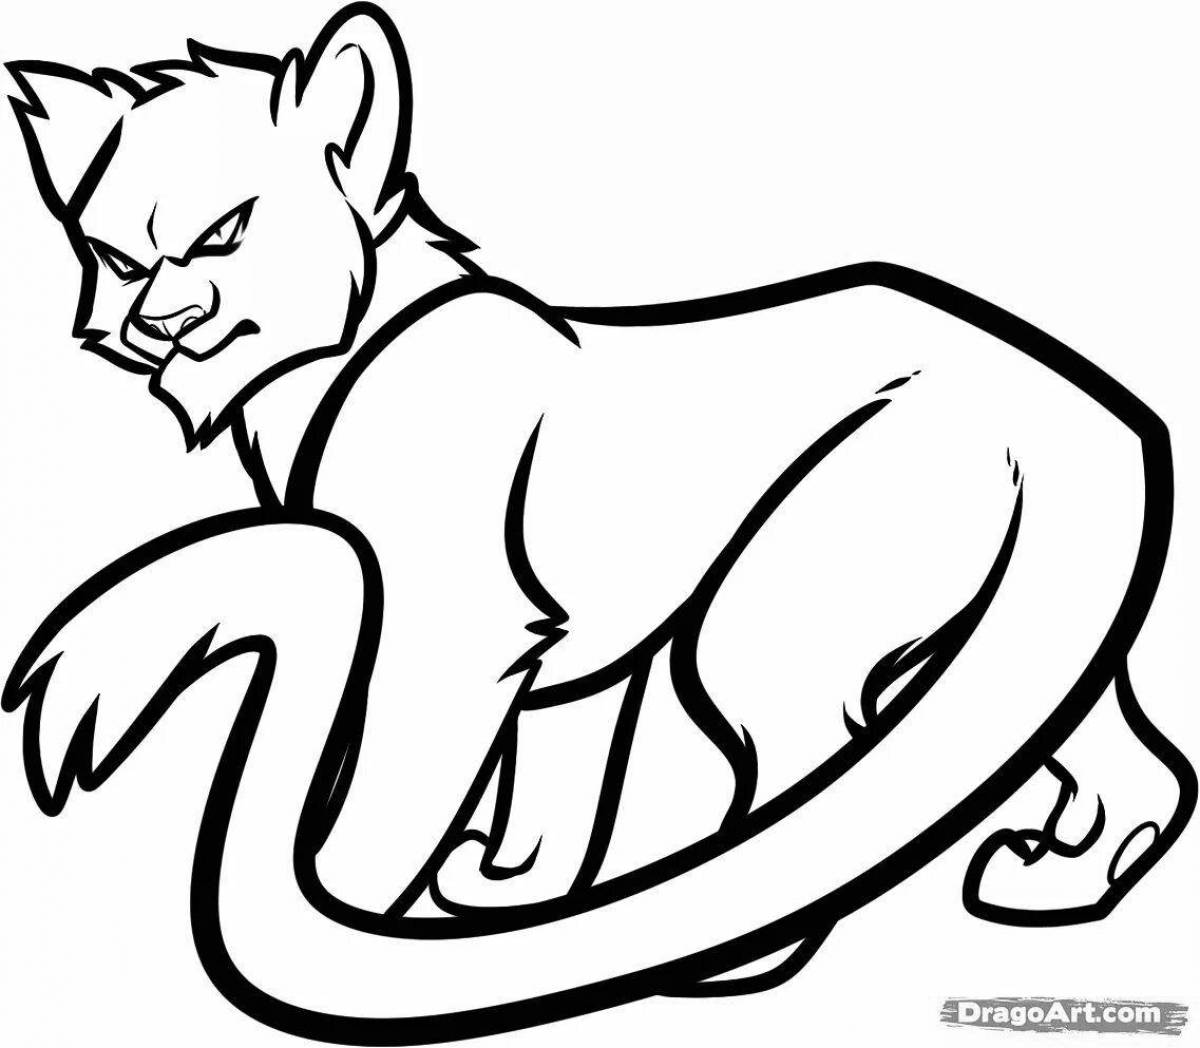 Awesome warrior cats coloring page